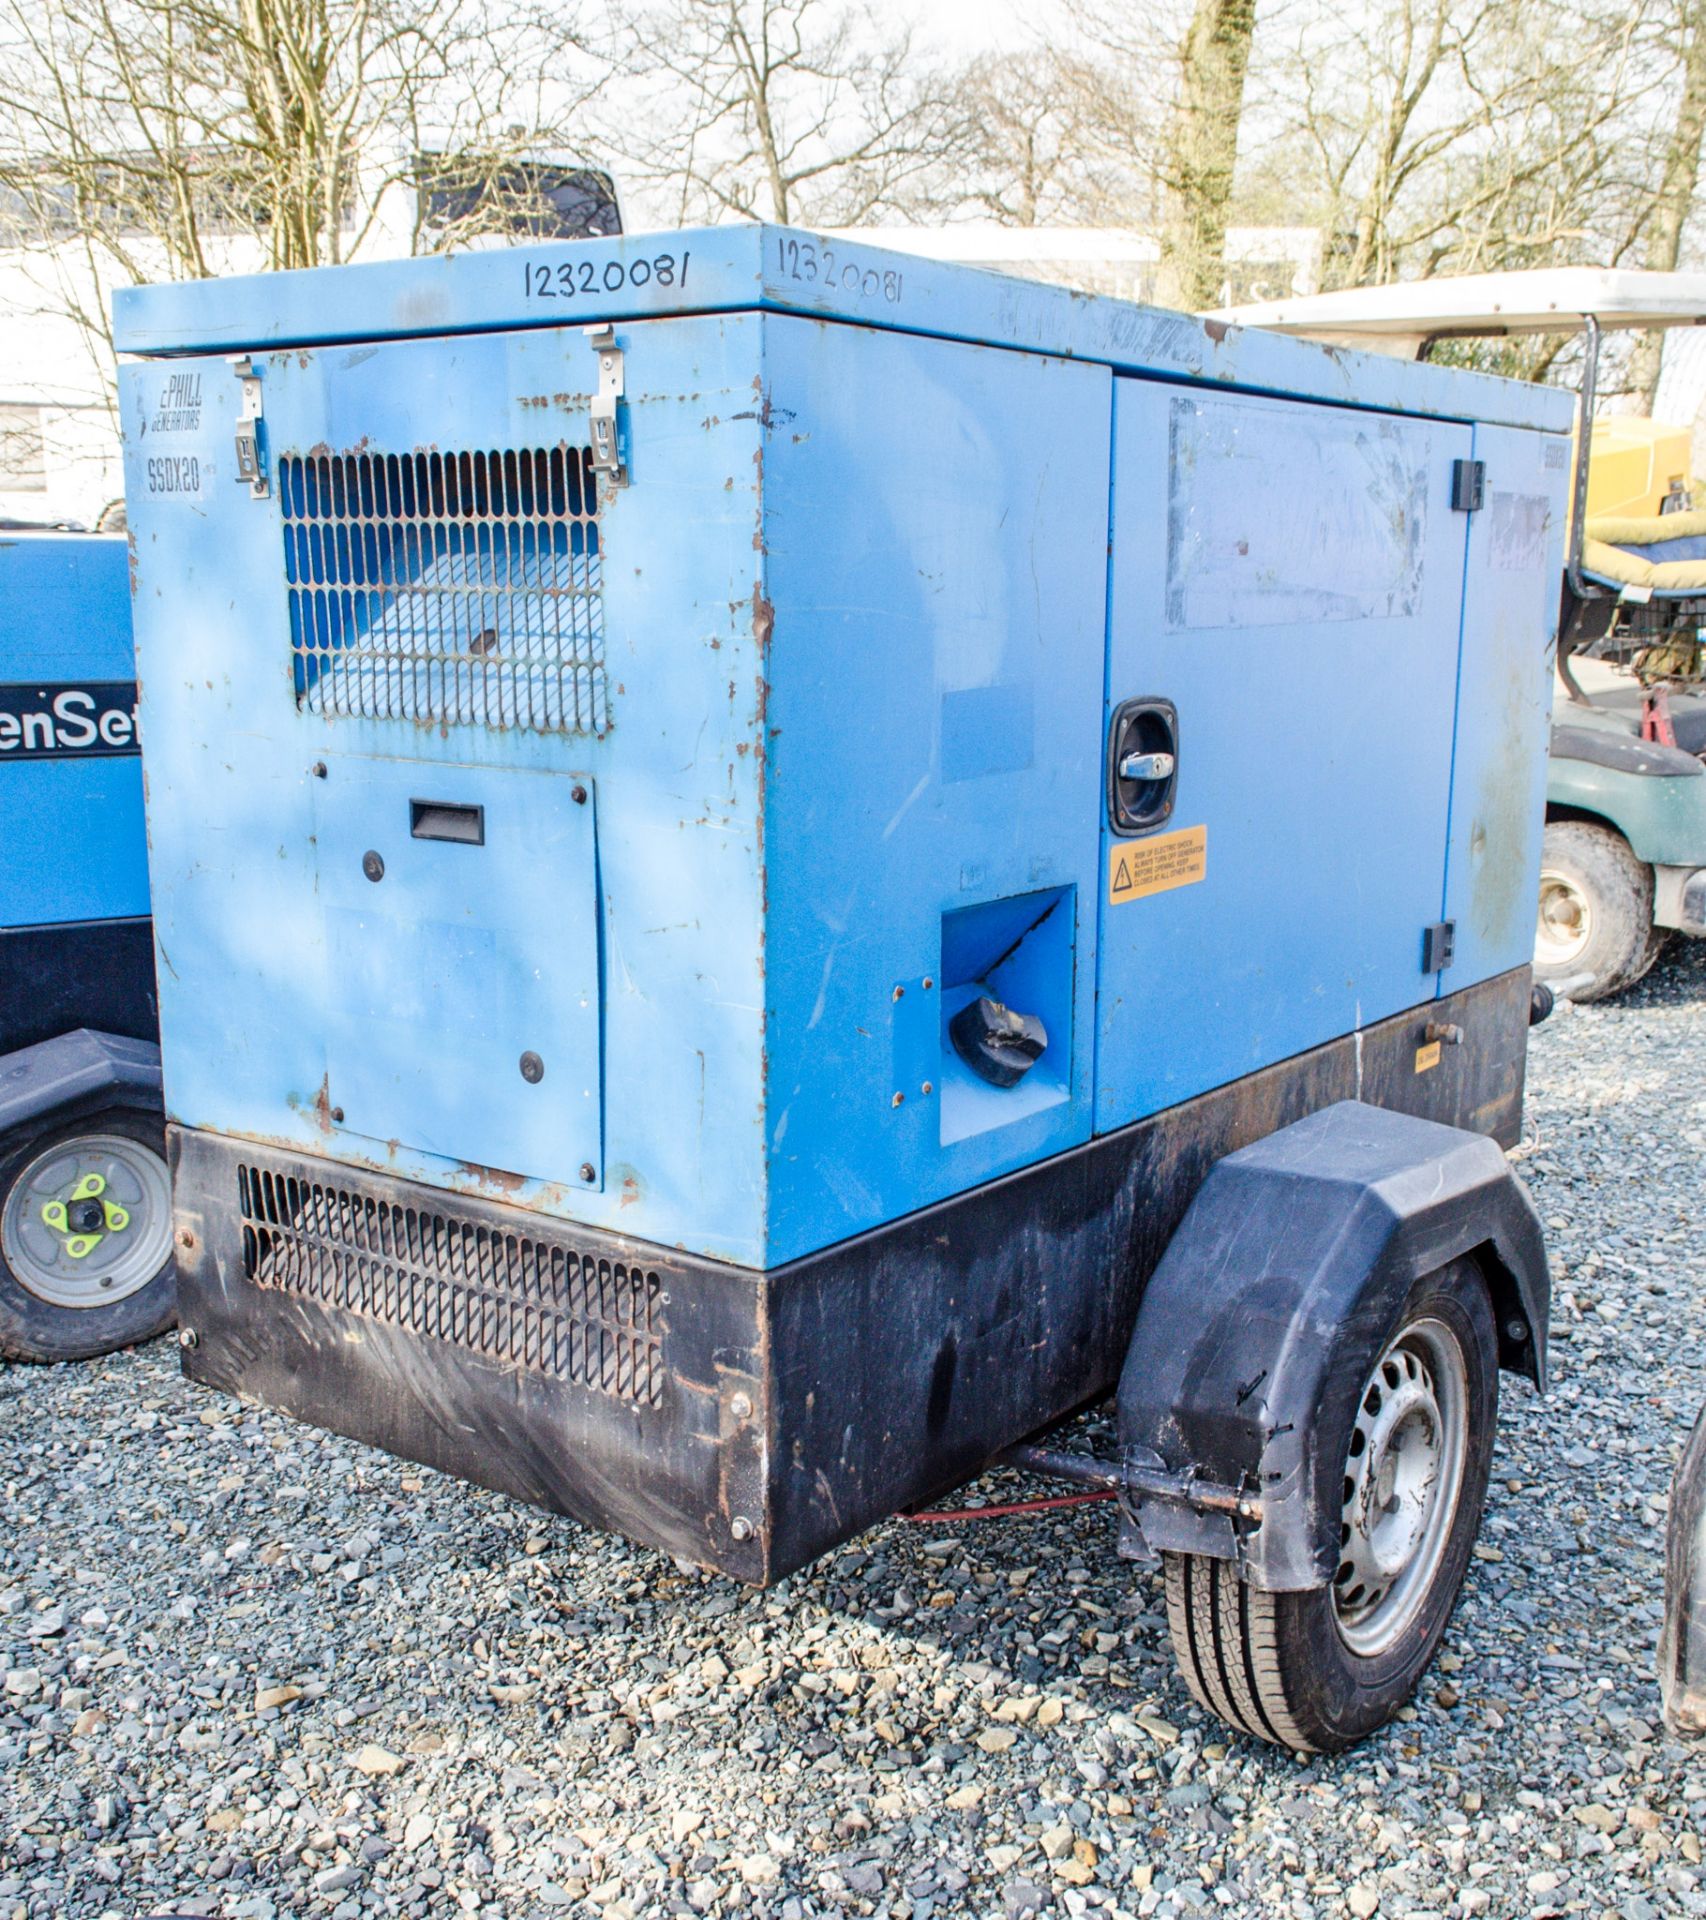 Stephill SSDX20 20 kva diesel driven generator S/N: 1509 Recorded Hours: Not displayed 12320081 - Image 2 of 5